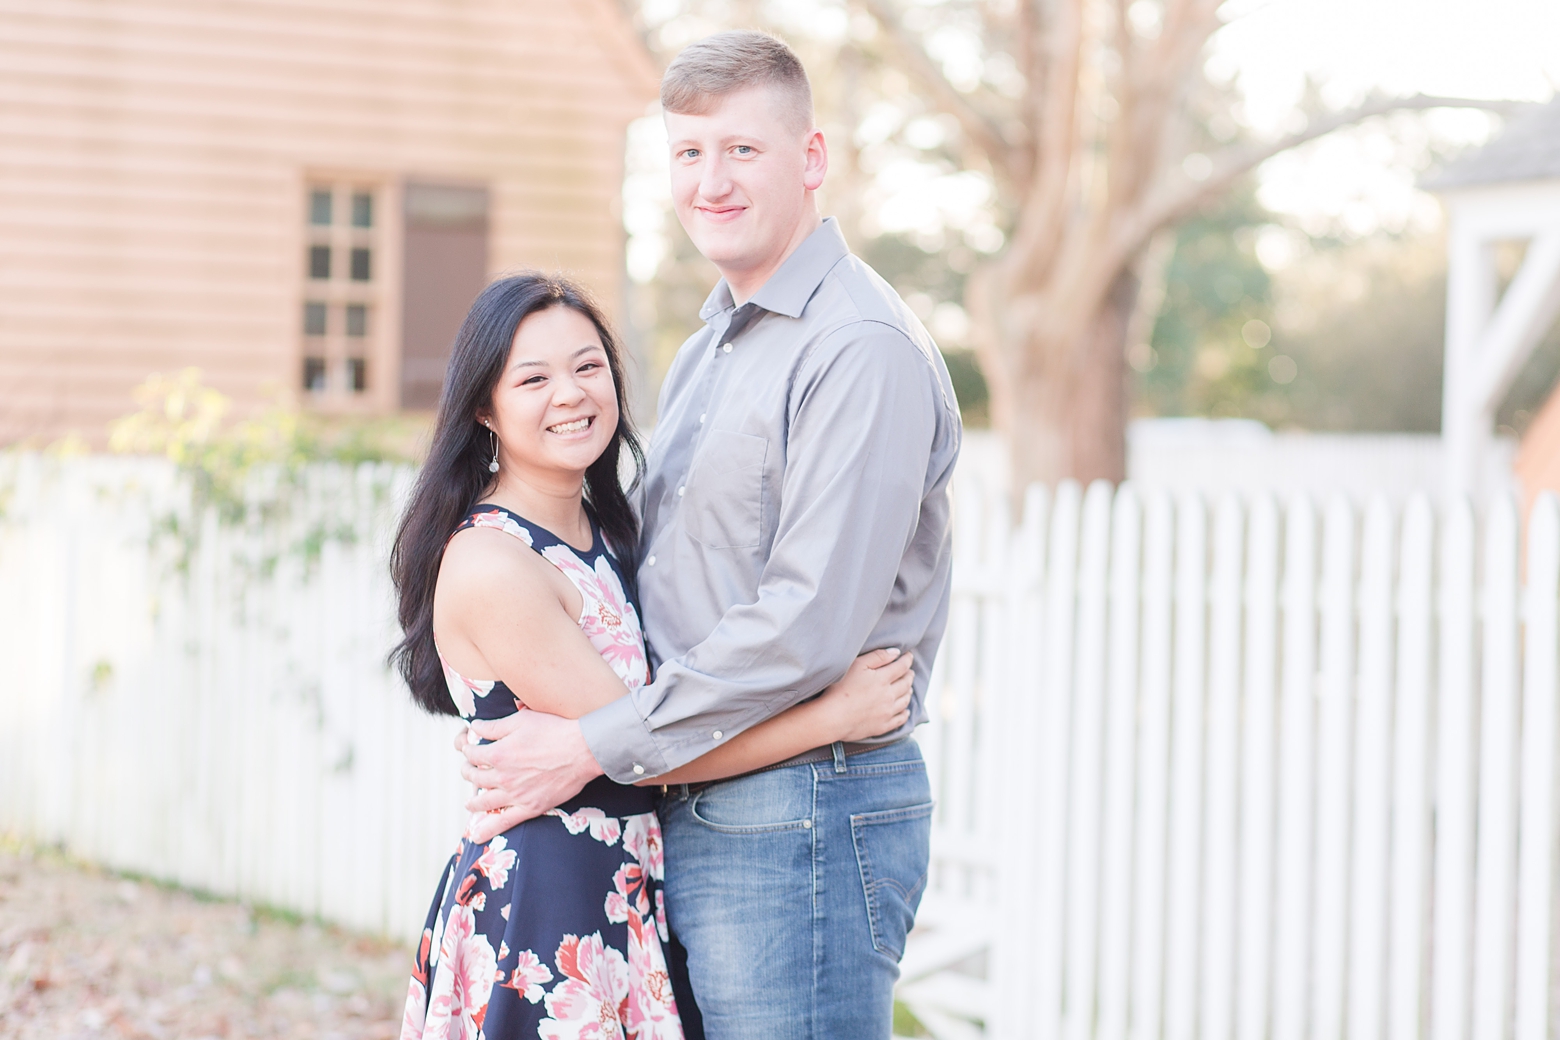 Colonial Williamsburg Engagement Photography by Angie McPherson Photography